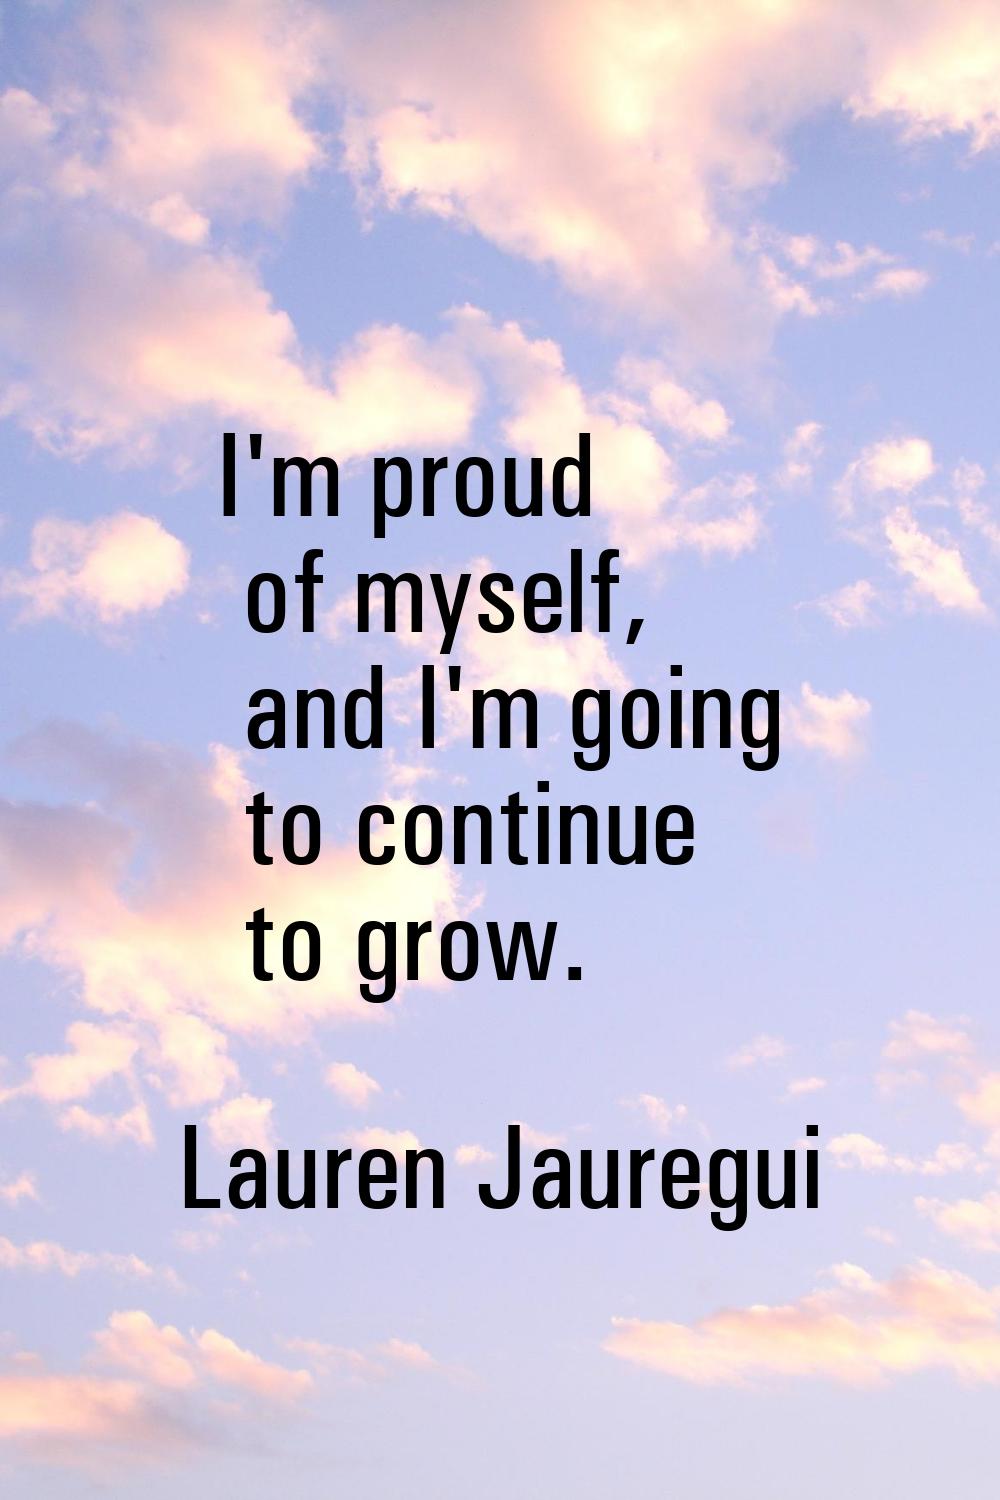 I'm proud of myself, and I'm going to continue to grow.